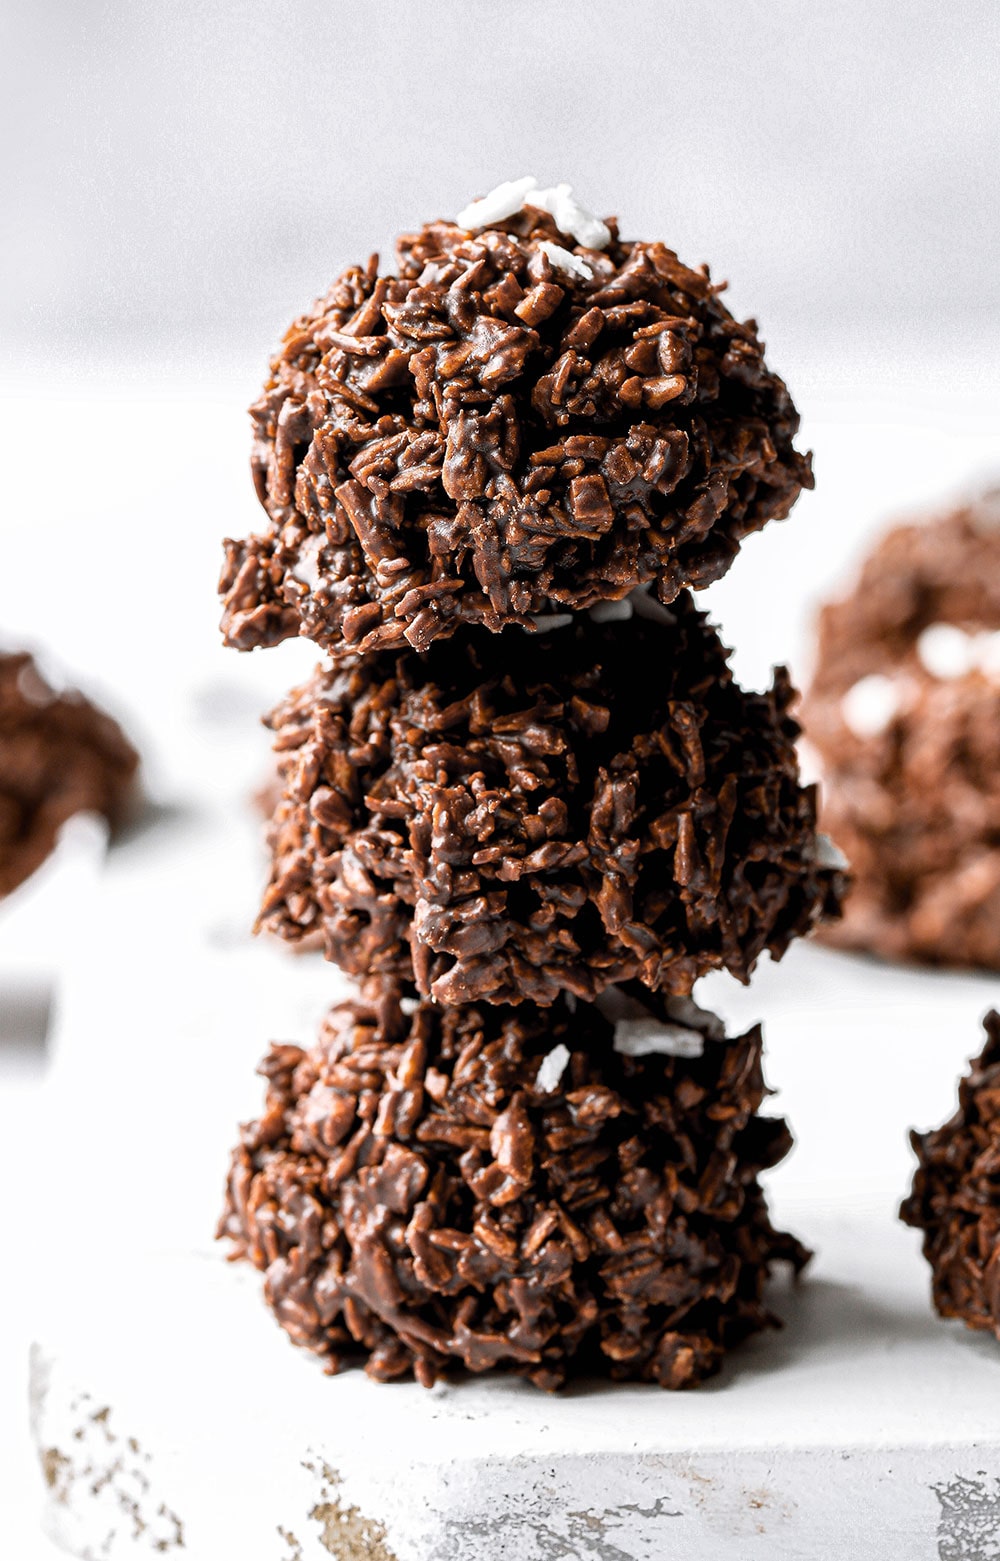 These 2-ingredient chocolate macaroons are so easy, I can barley call it a recipe. As the title suggests, you'll only need two ingredients that you've probably already guessed...yep, just dark chocolate and desiccated coconut!